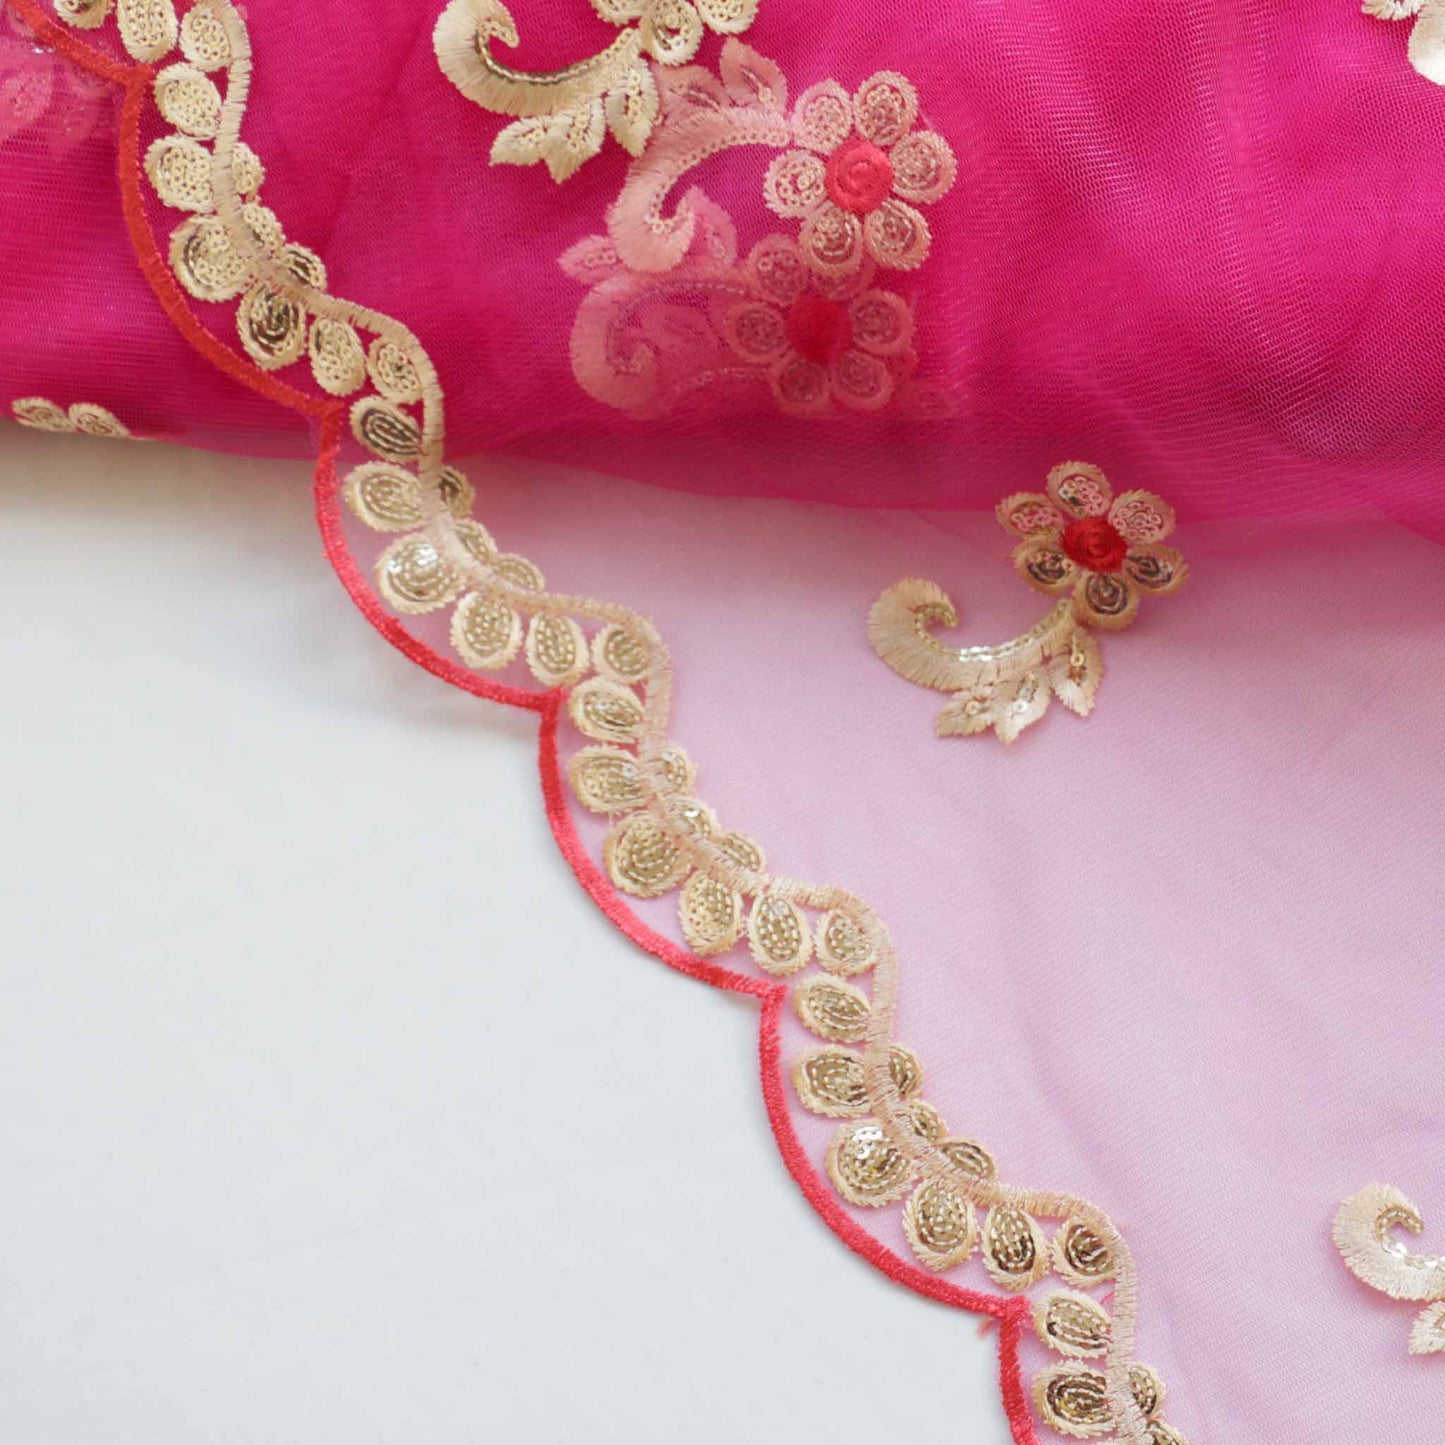 pink and gold embroidered Indian lace dressmaking fabric